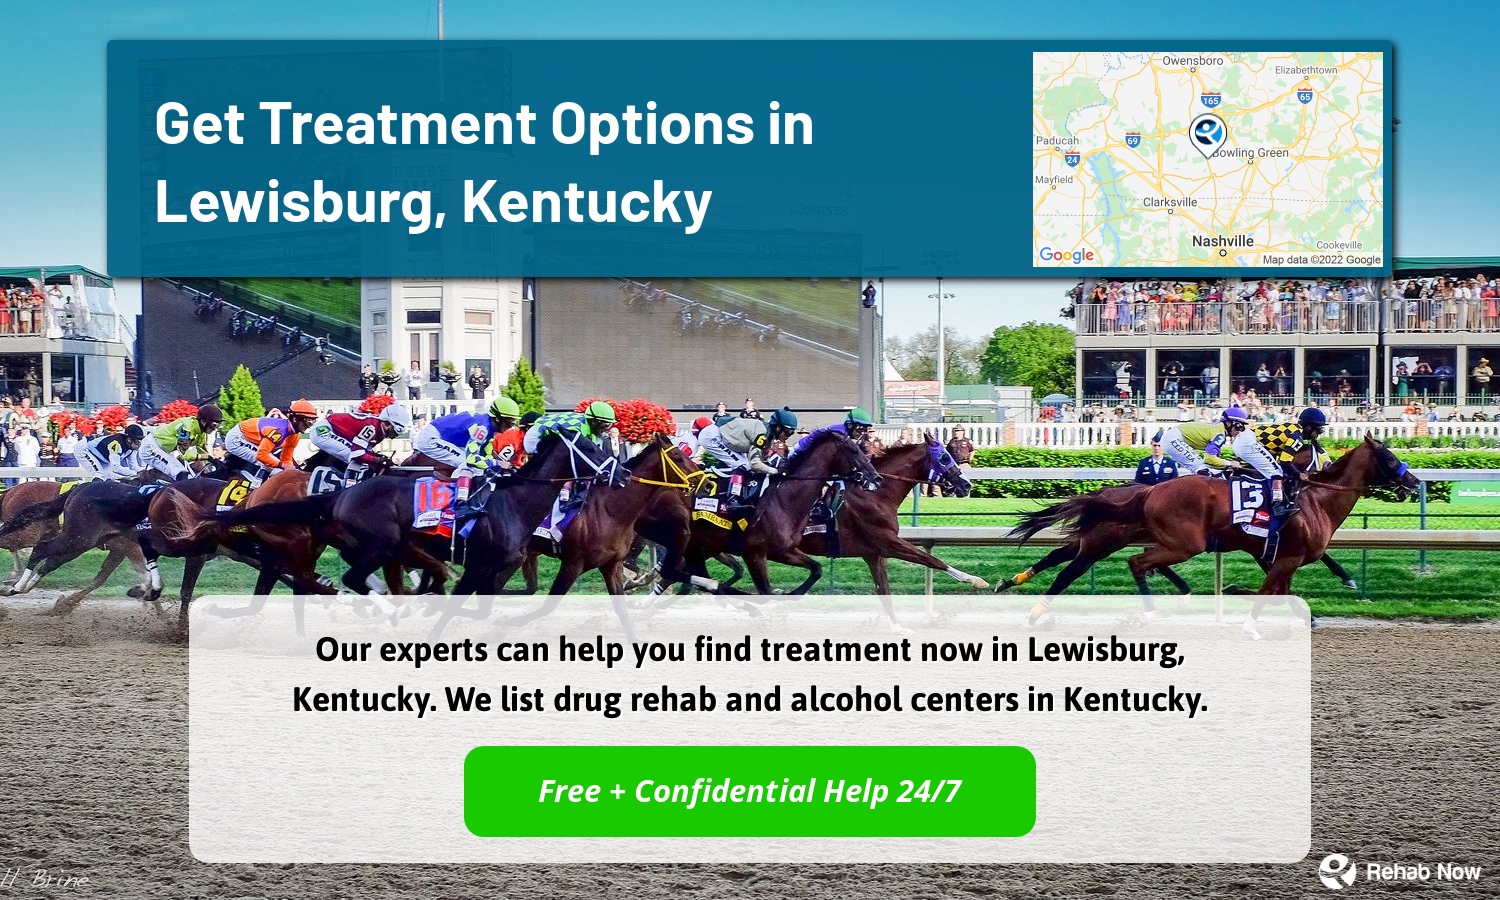 Our experts can help you find treatment now in Lewisburg, Kentucky. We list drug rehab and alcohol centers in Kentucky.